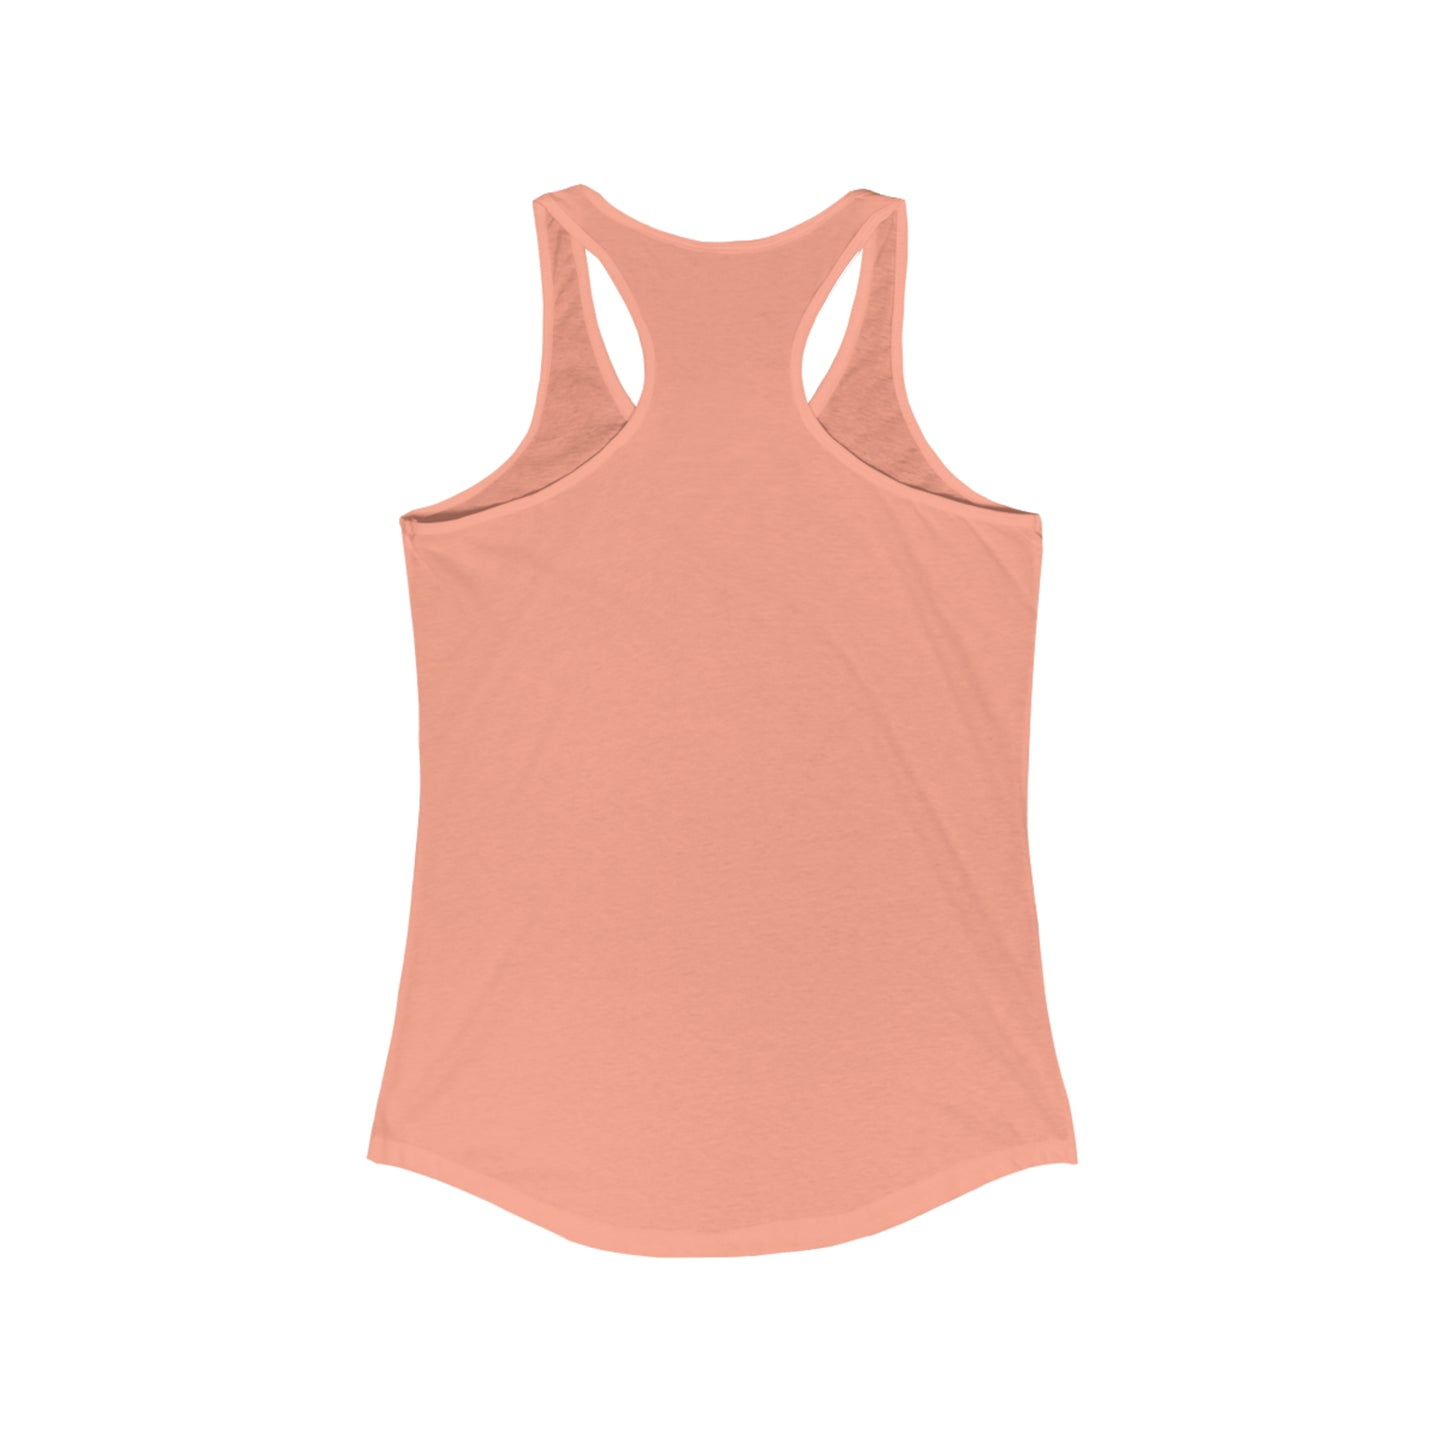 Peach racerback tank top on a white background, no model.